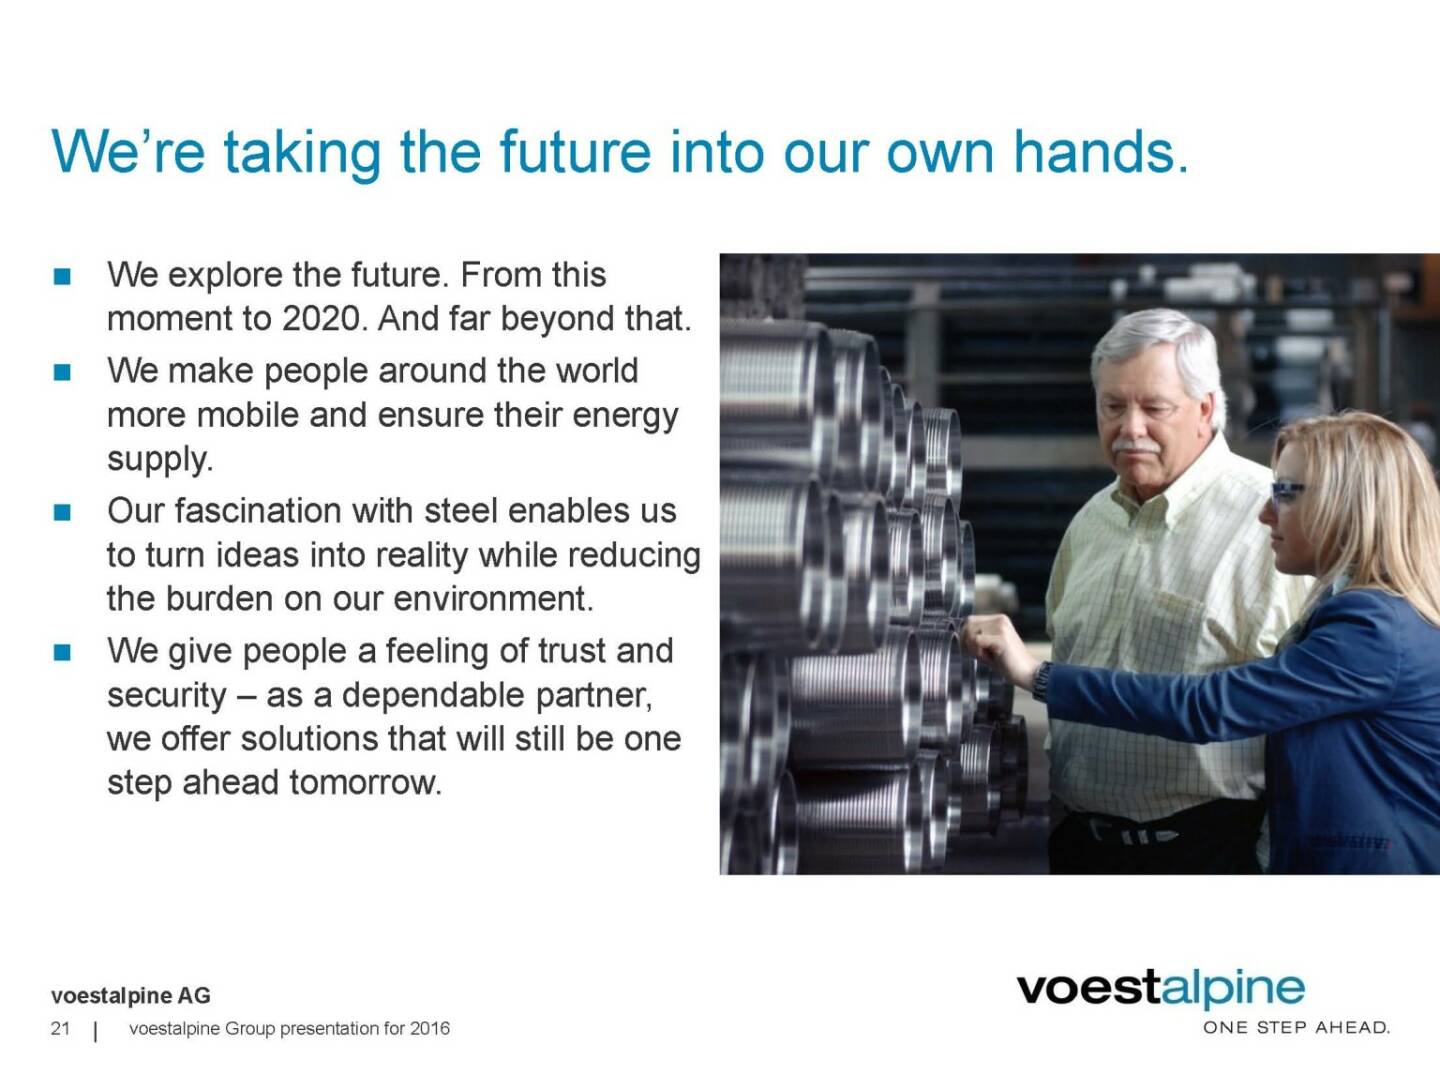 voestalpine - We're taking the future into our hands